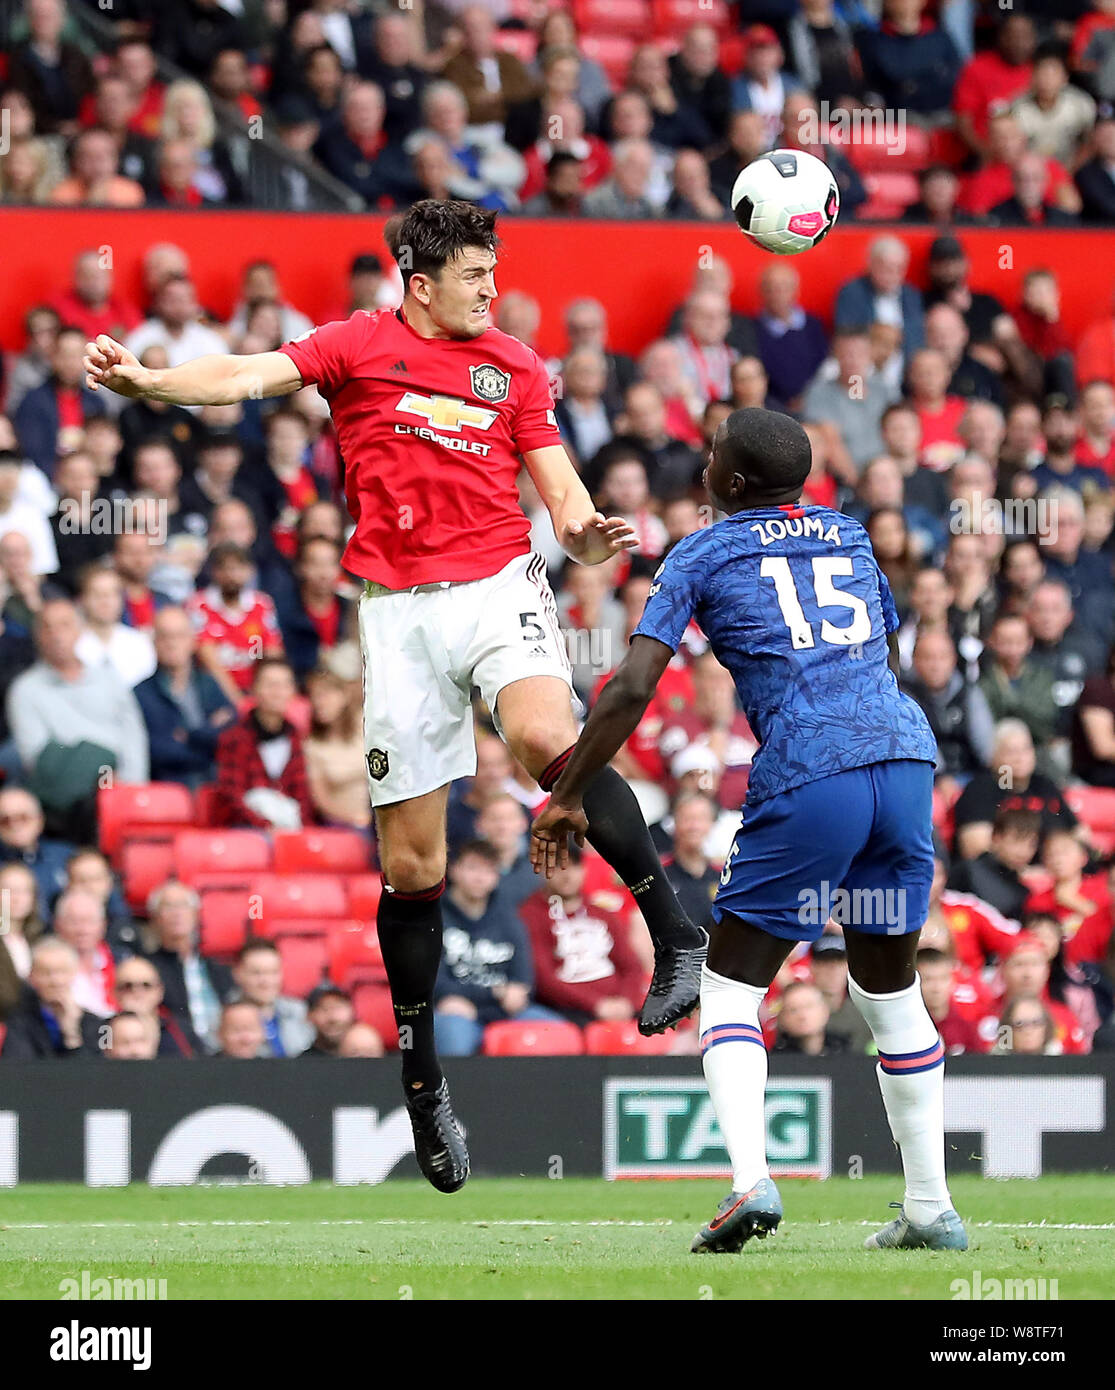 Manchester United S Harry Maguire Heads The Ball Watched By Chelsea S Kurt Zouma During The Premier League Match At Old Trafford Manchester Stock Photo Alamy